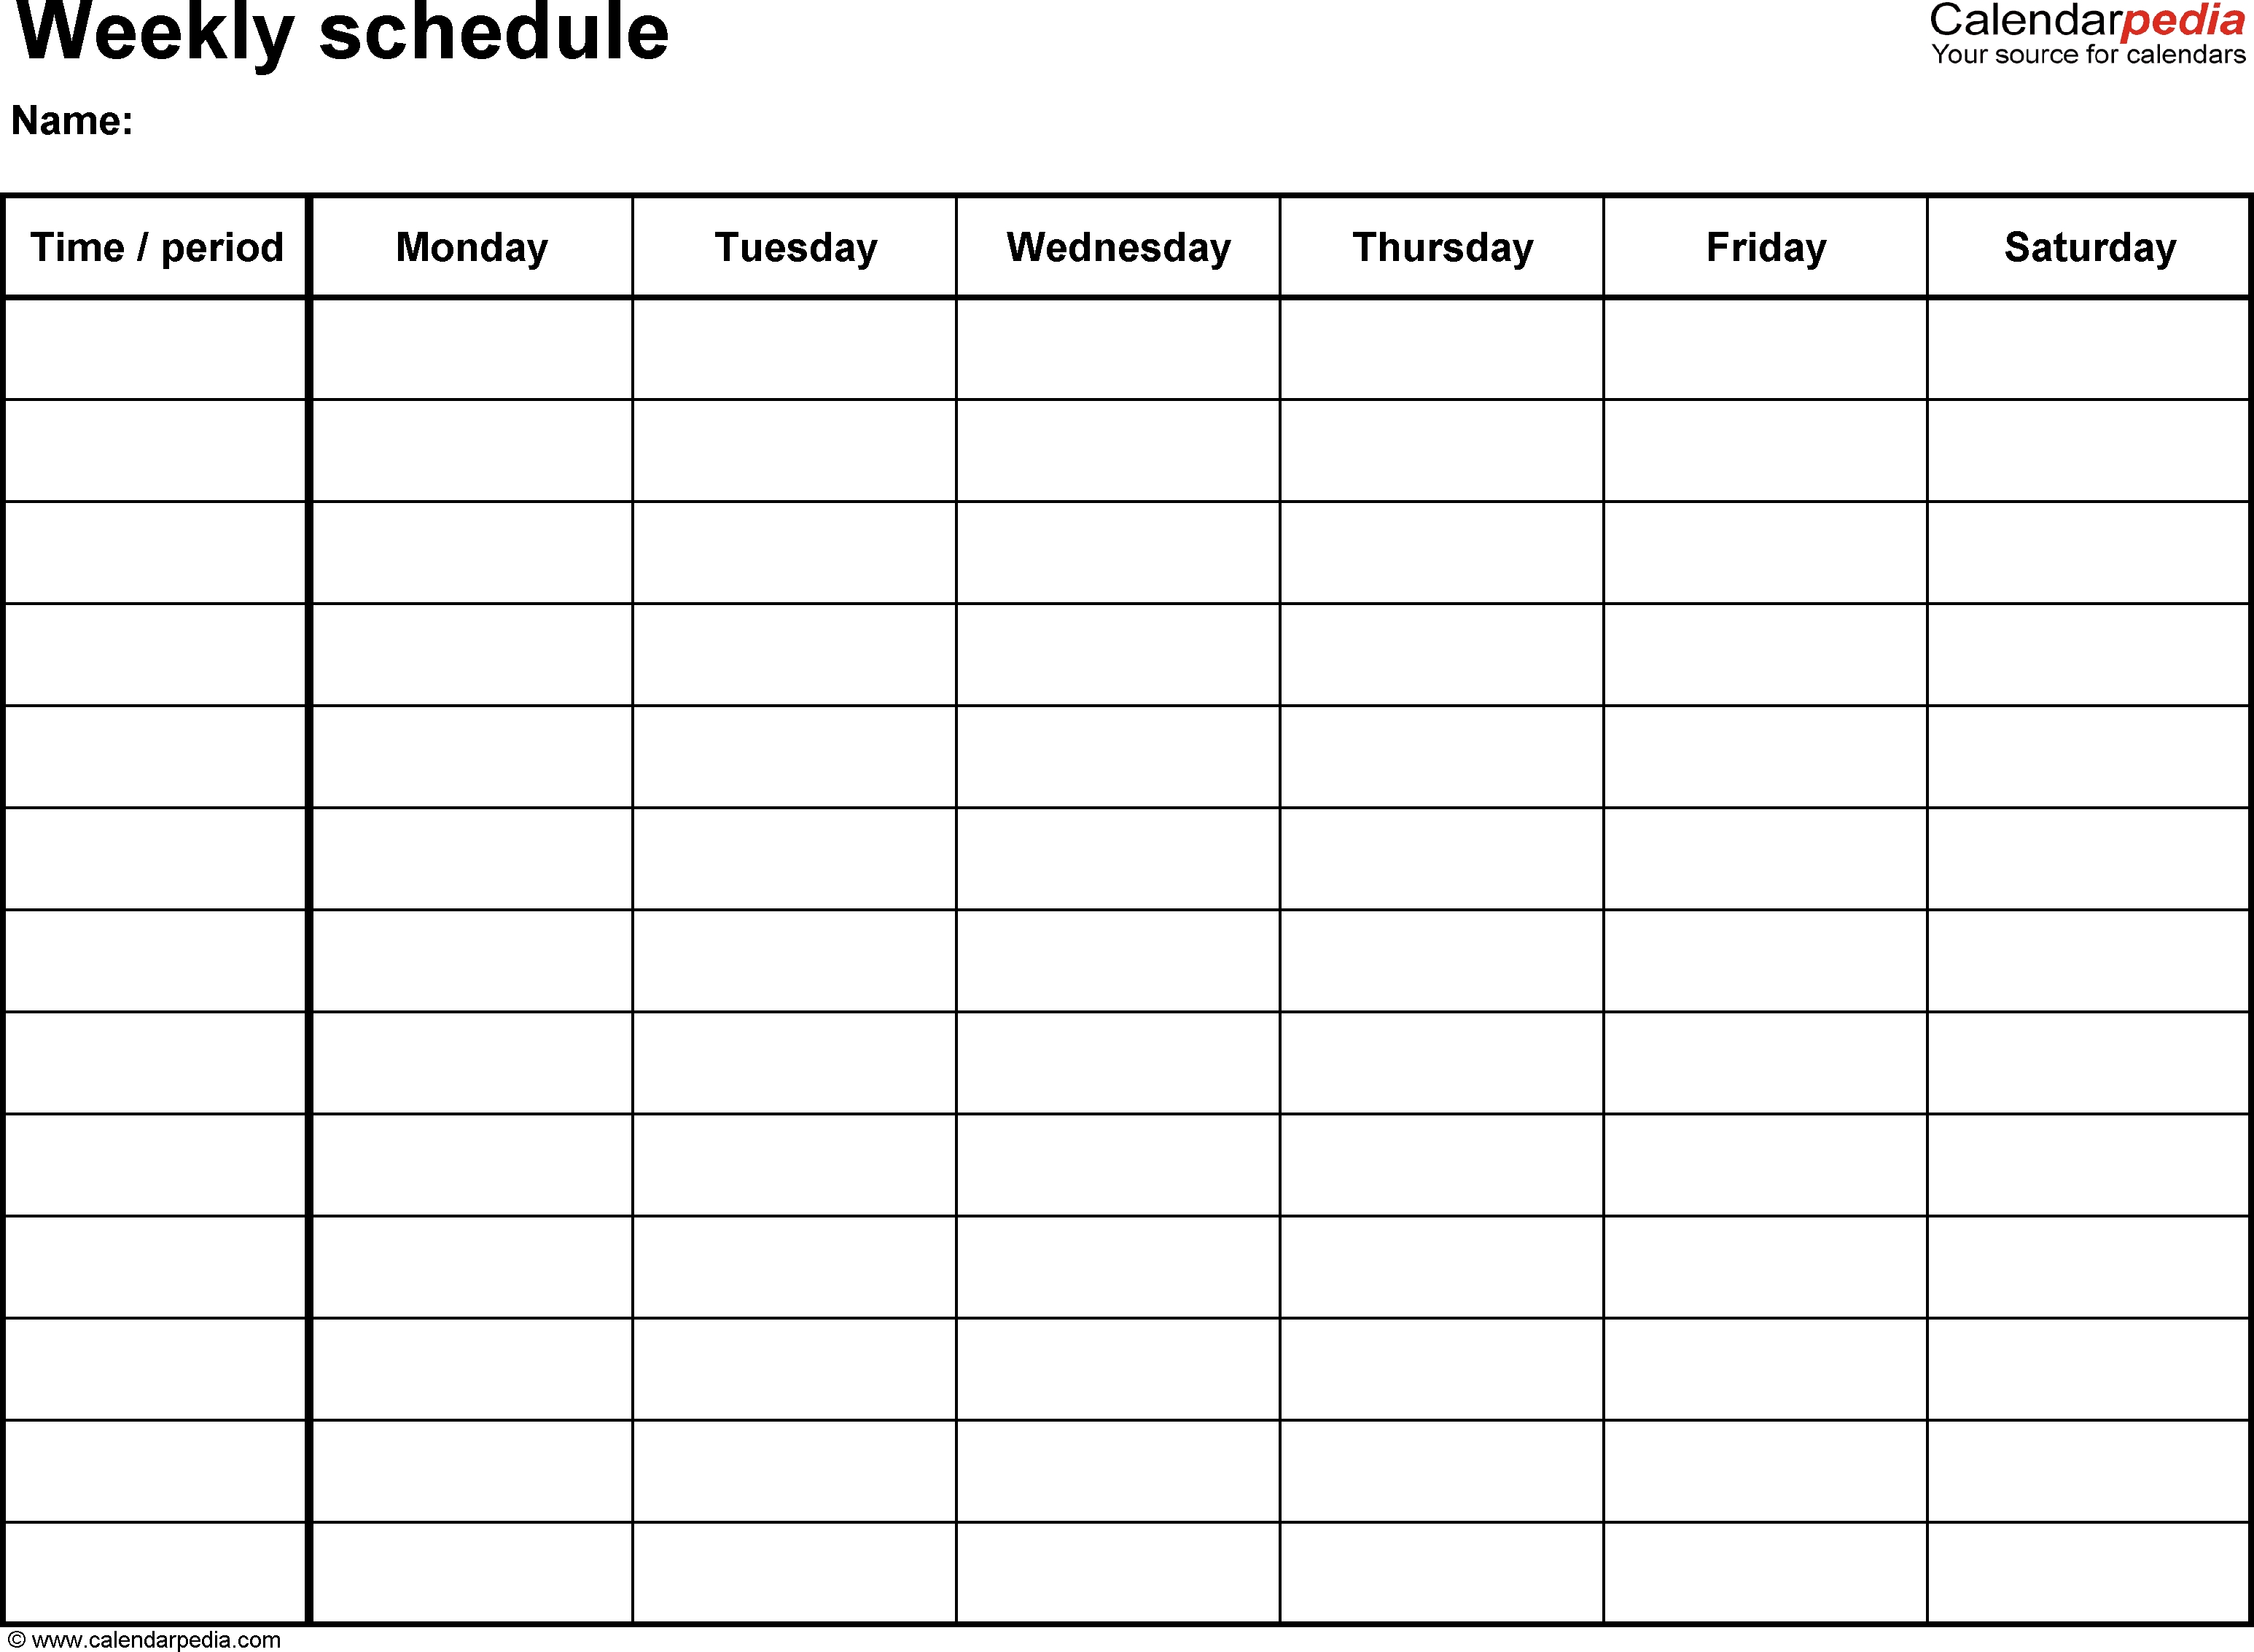 Free Weekly Schedule Templates For Pdf - 18 Templates with regard to Calendar Blank Printable Monday Start A4